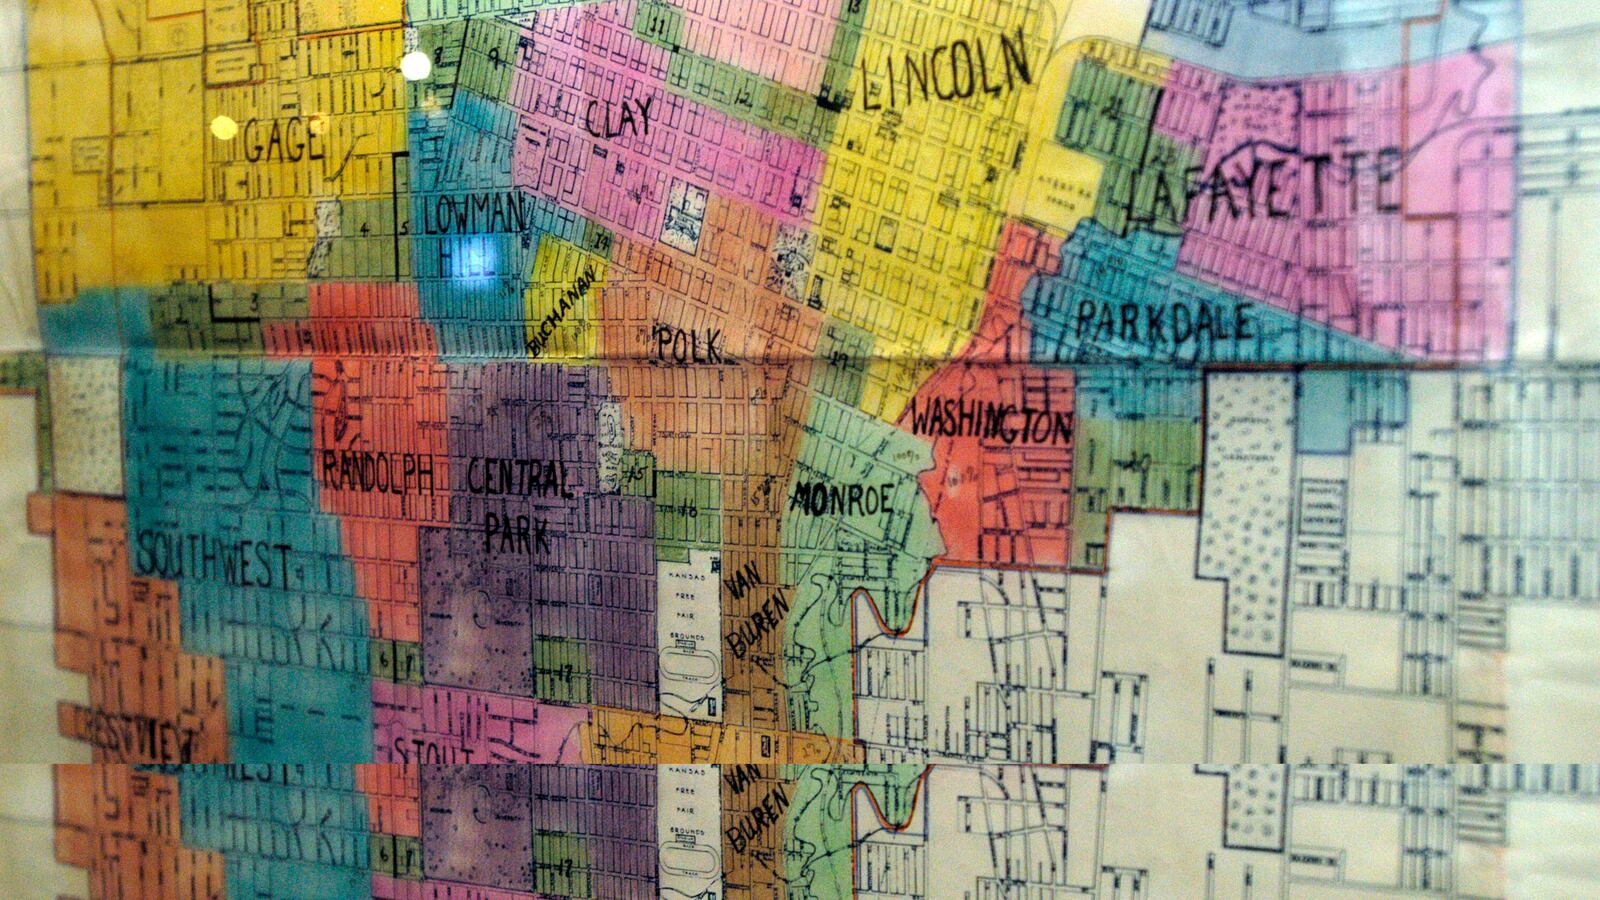 A multicolored map of segregated schools in Topeka, Kansas, 1956.